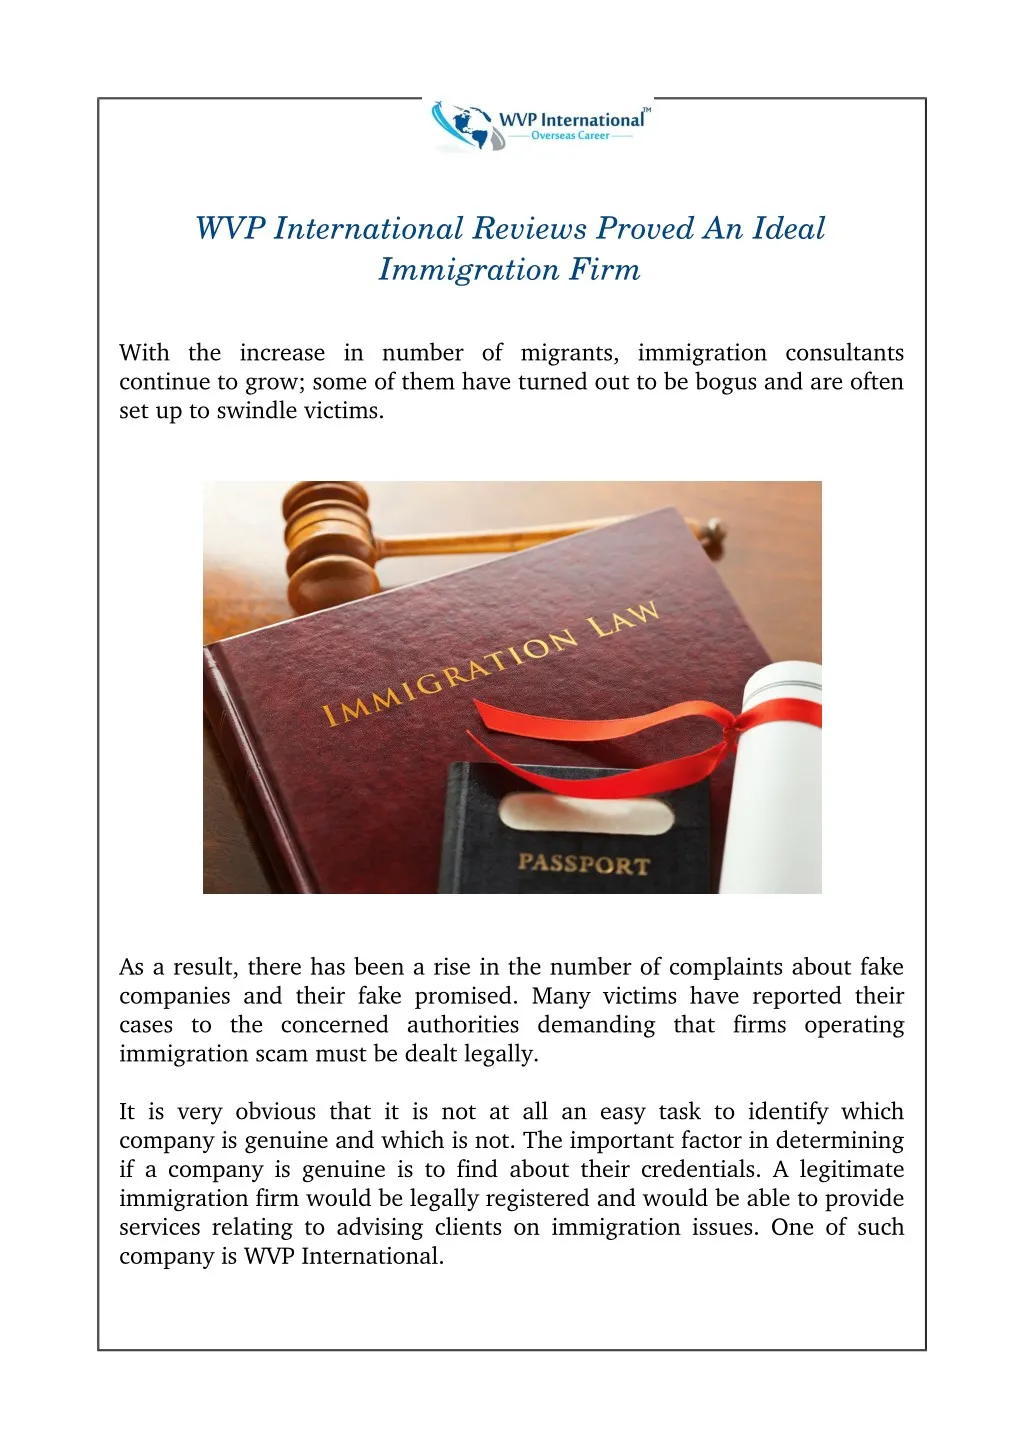 wvp international reviews proved an ideal